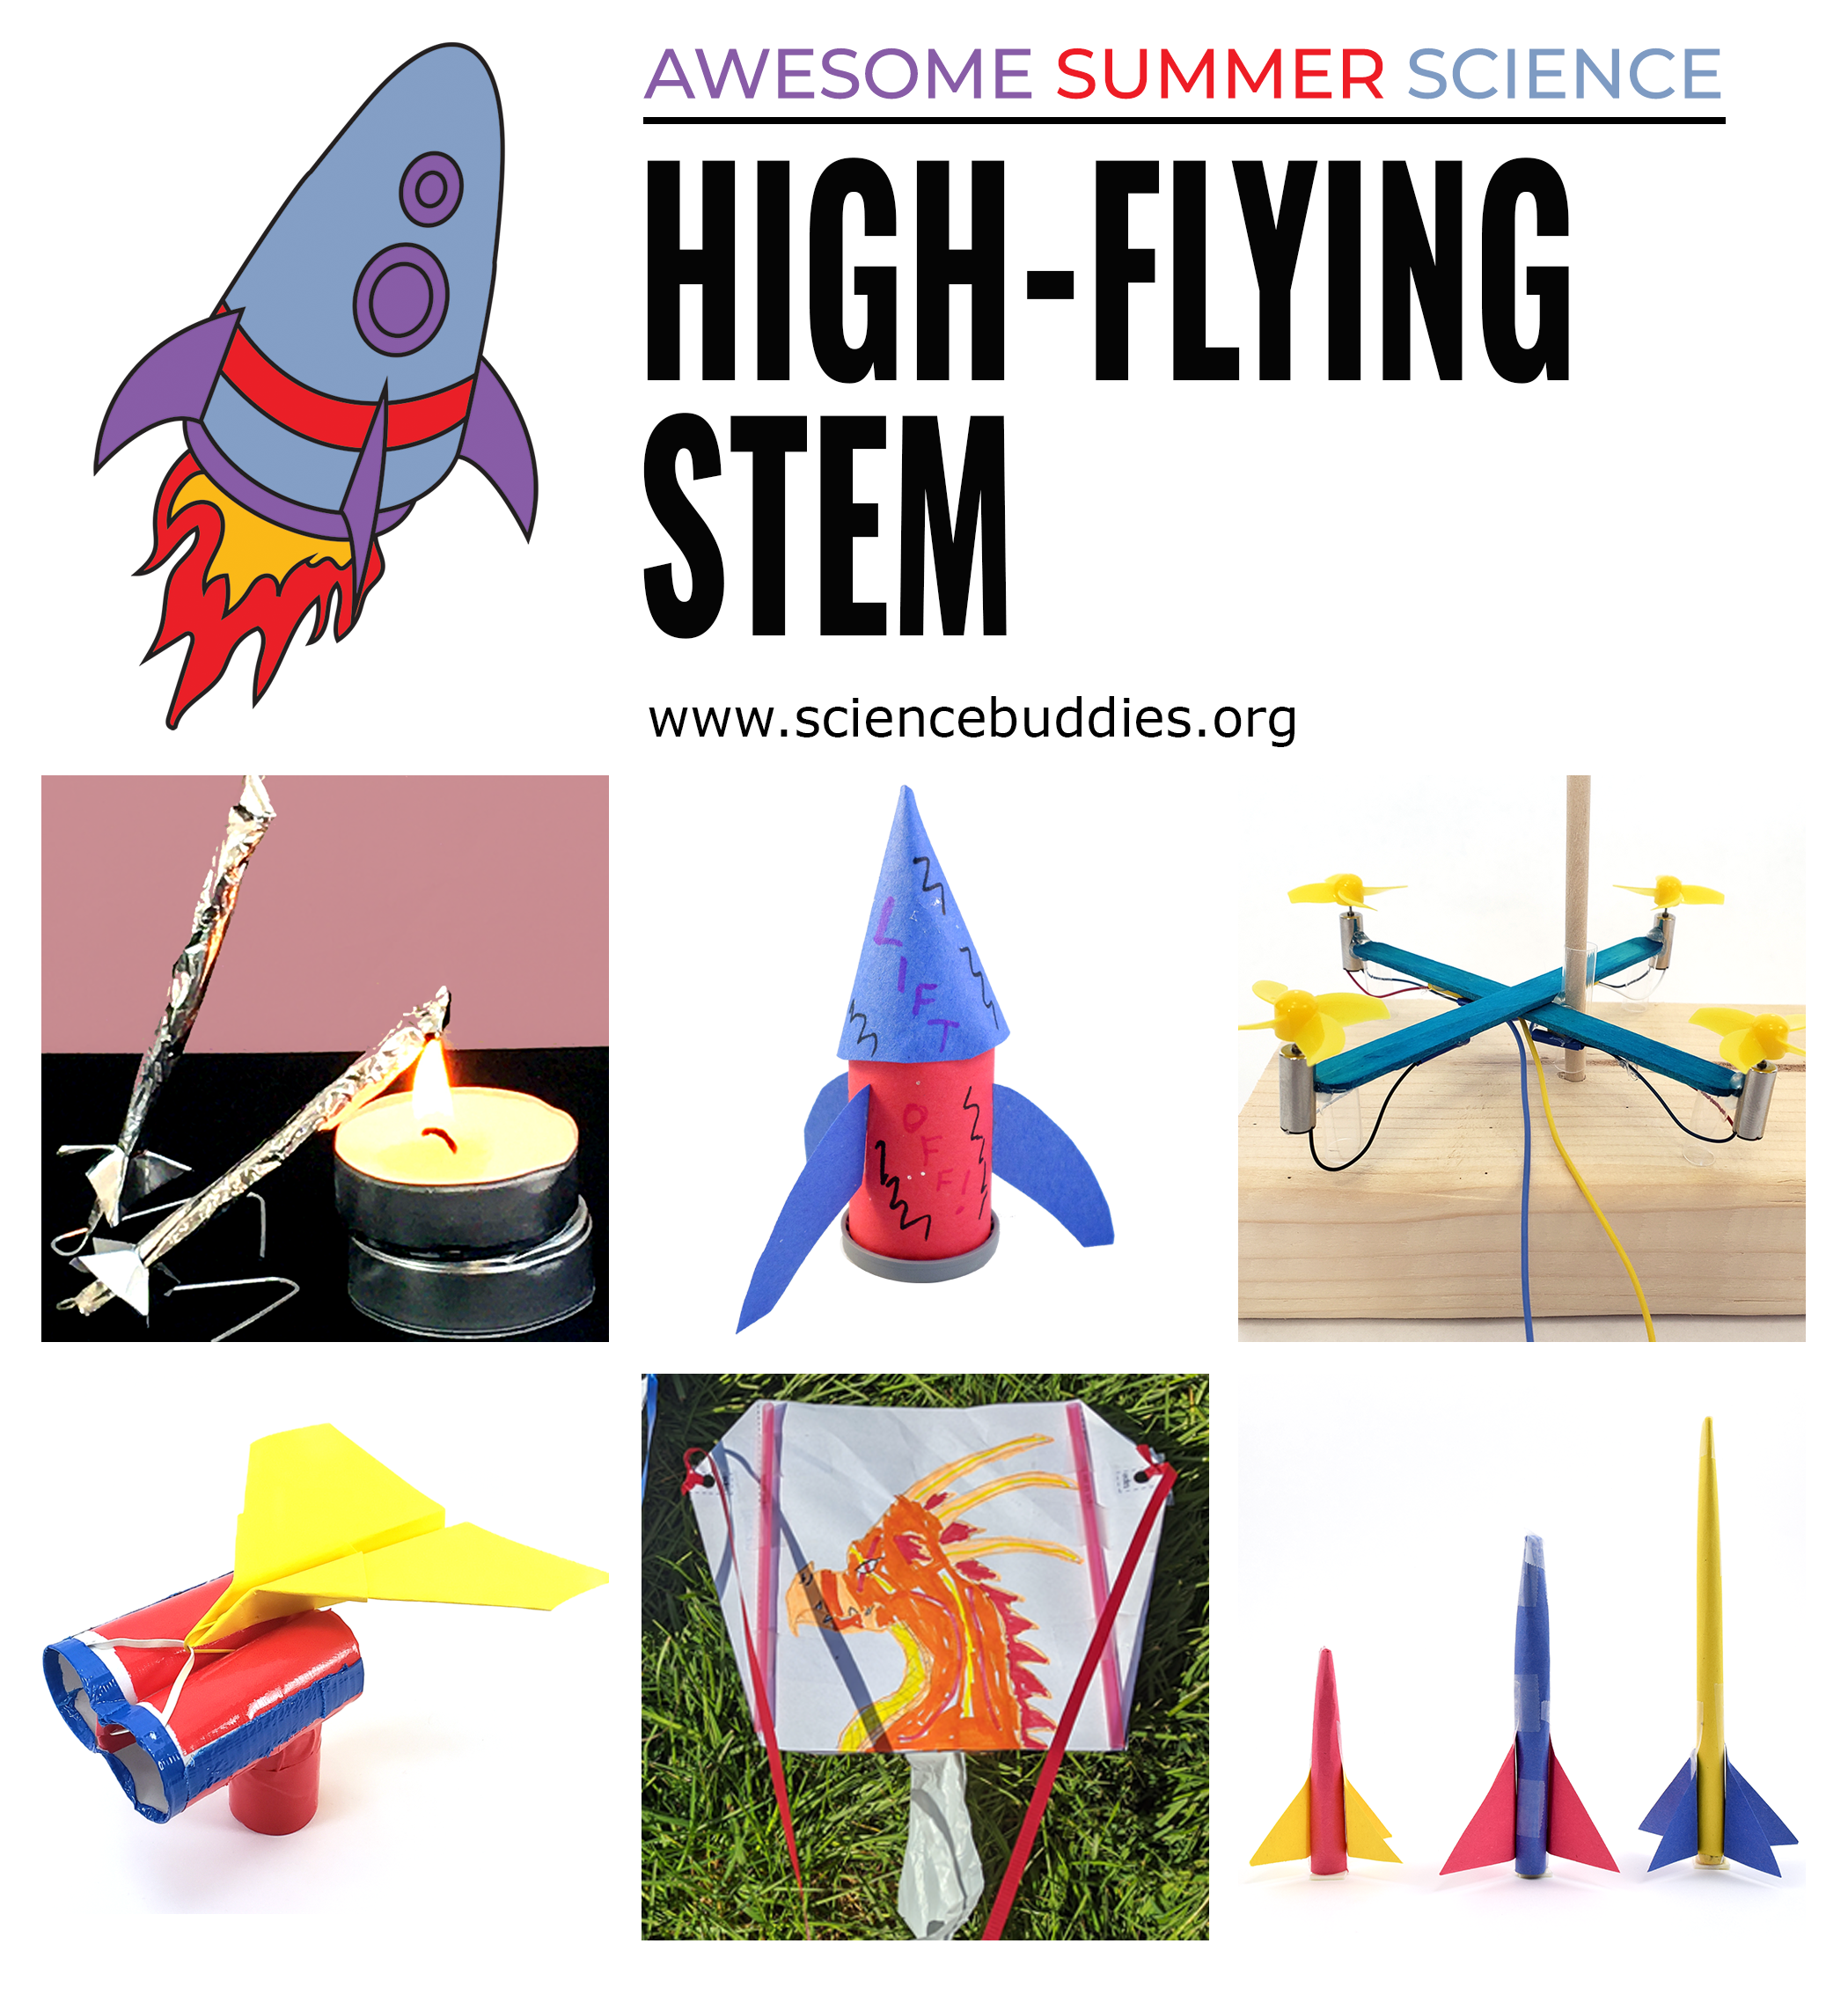 Matchstick rockets, baking soda rocket, paper rocket, drone, kite, paper airplane launcher for High-Flying STEM Week 4 of Awesome Summer Science Experiments